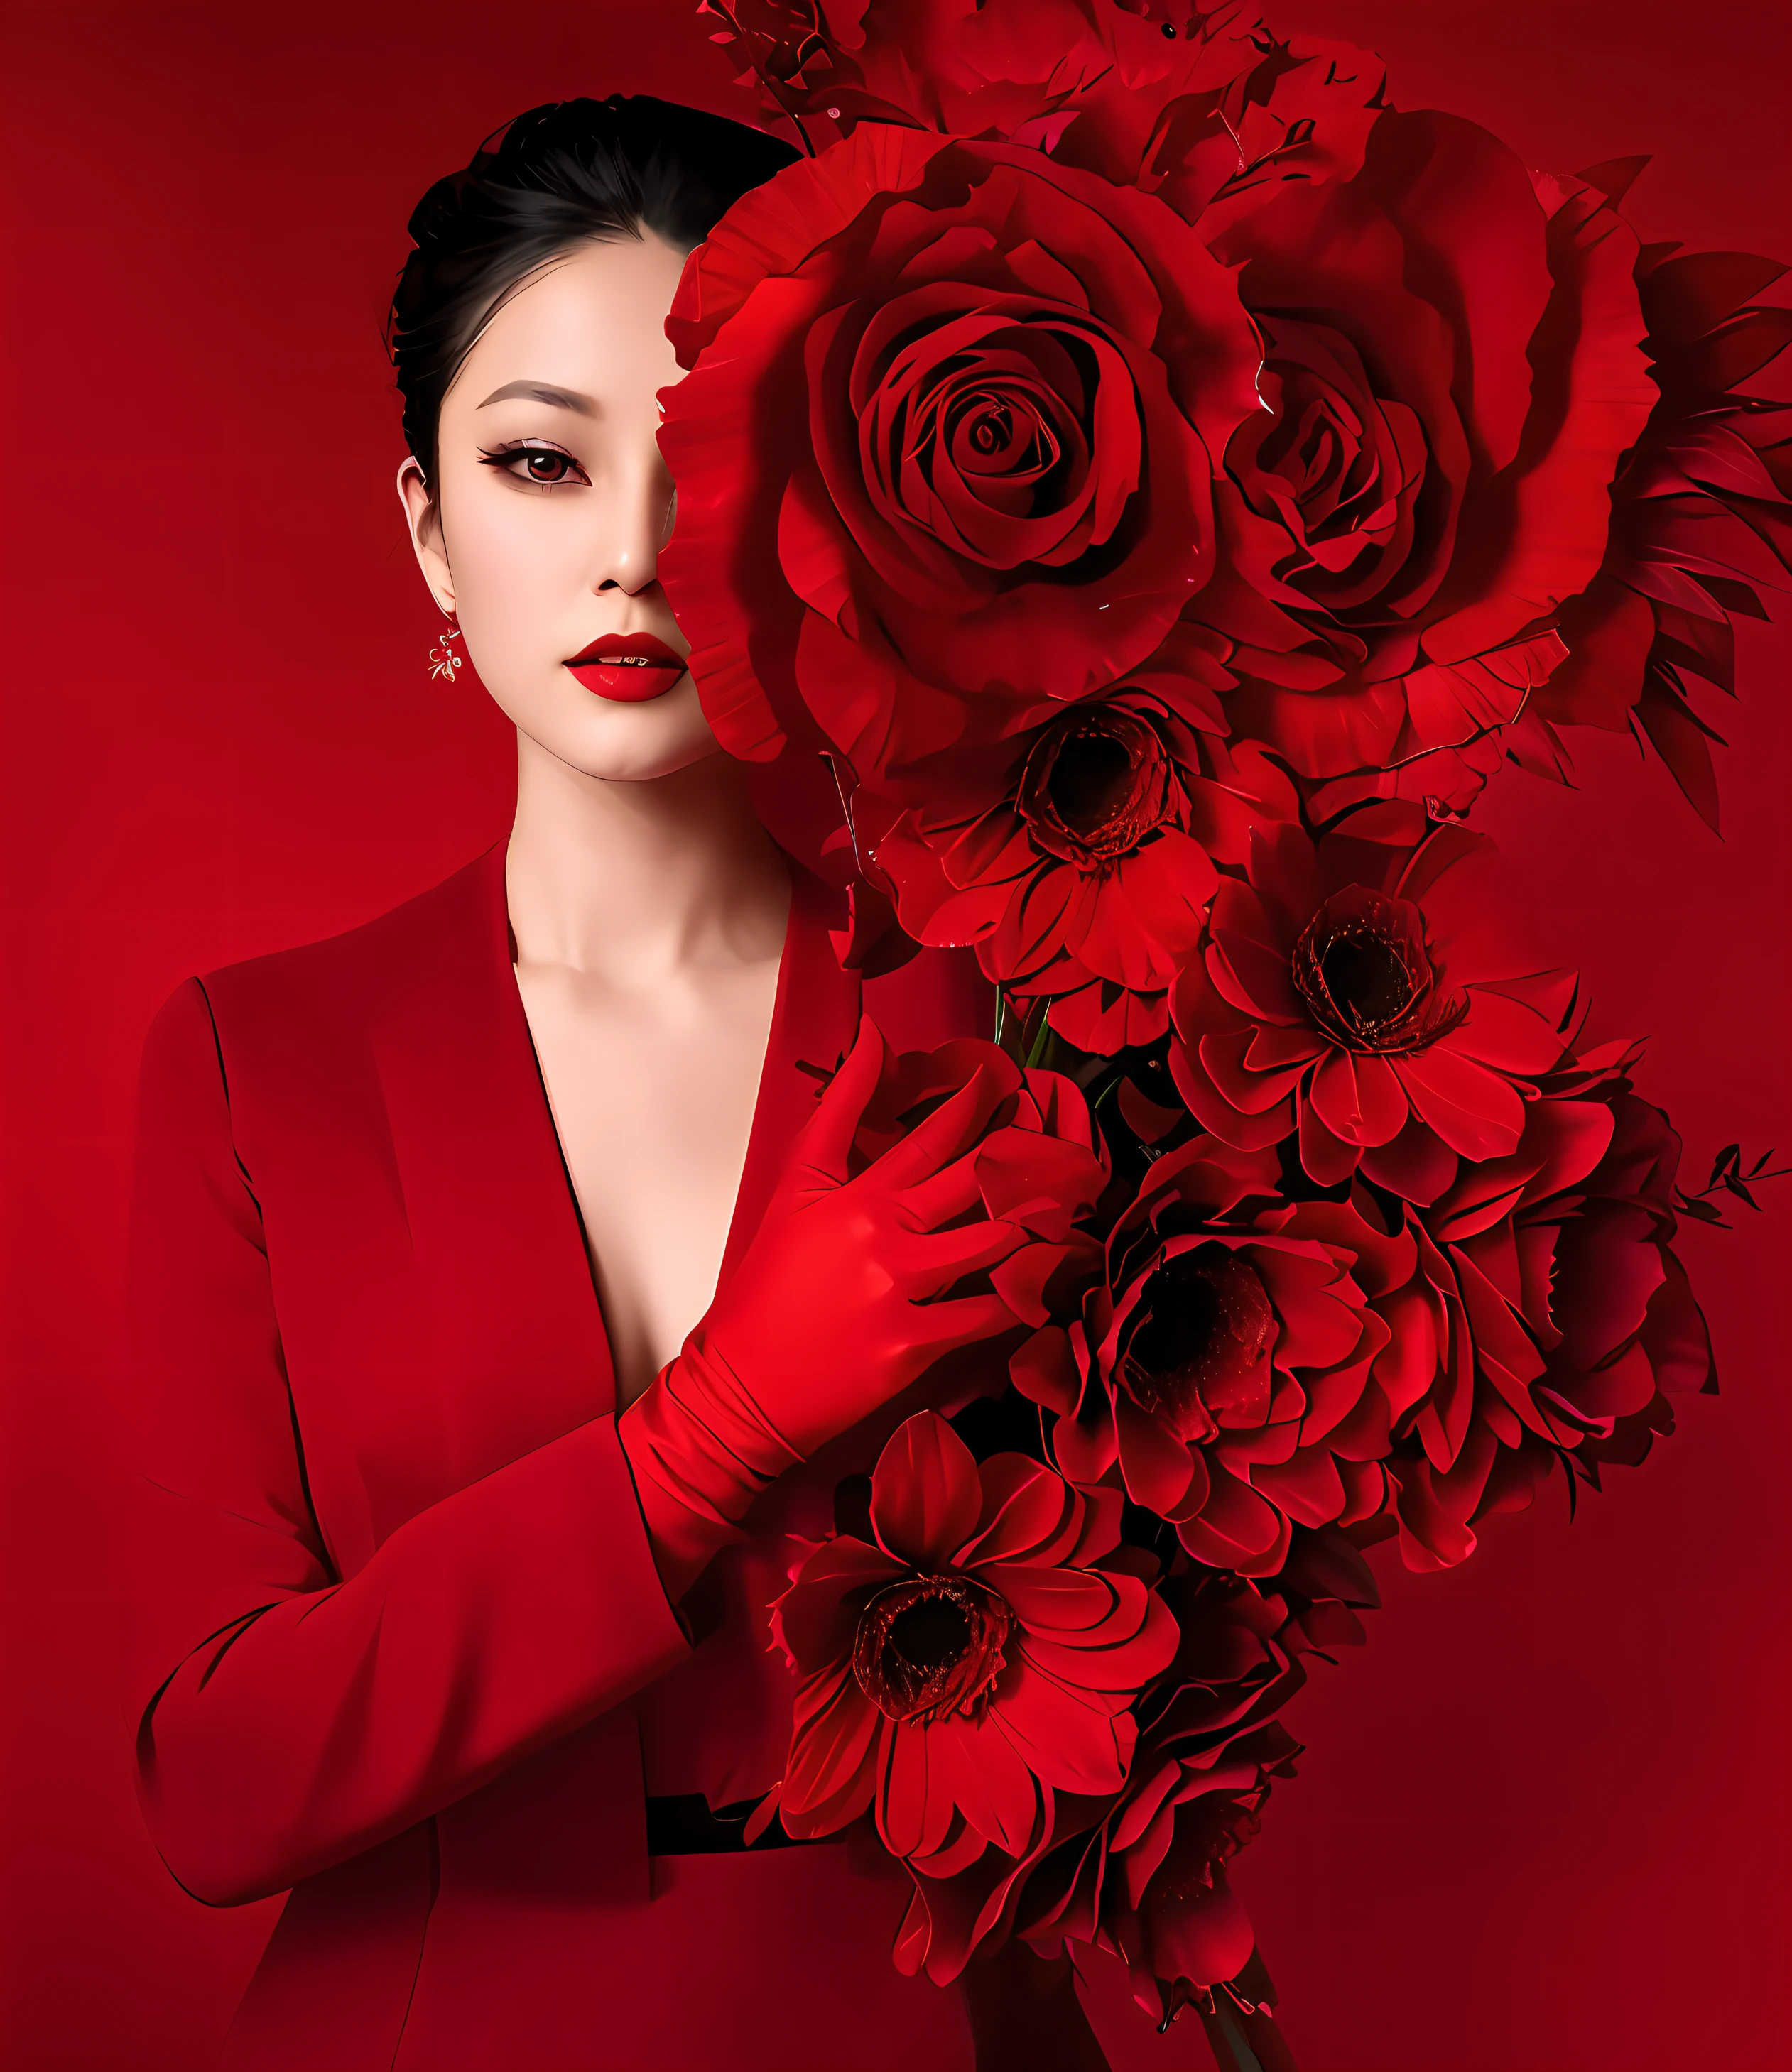 There was a woman in a red suit holding a bouquet of flowers, Zhang Jingna, rich red colors, All red, fine art fashion photography, vibrant red colors, red adornments, shades of red, Red roses, red colour, xue han, Red accents, Red clothes, Very red, Red tones, celestial red flowers vibe, wearing red